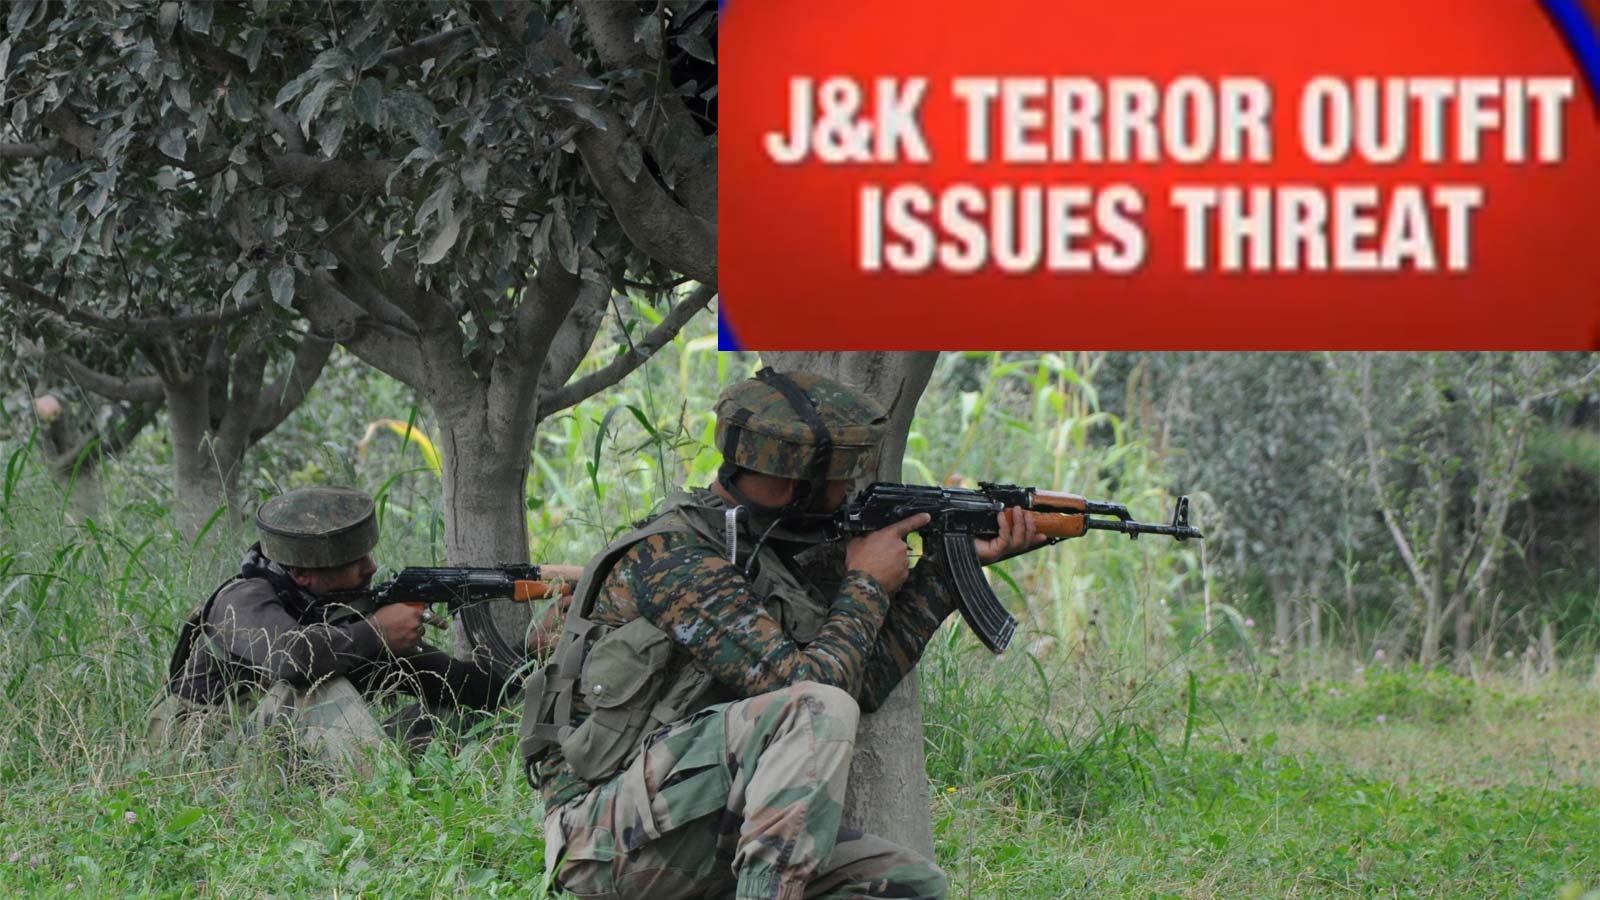 J&K terror outfit issues open threat – Indian Defence Research Wing